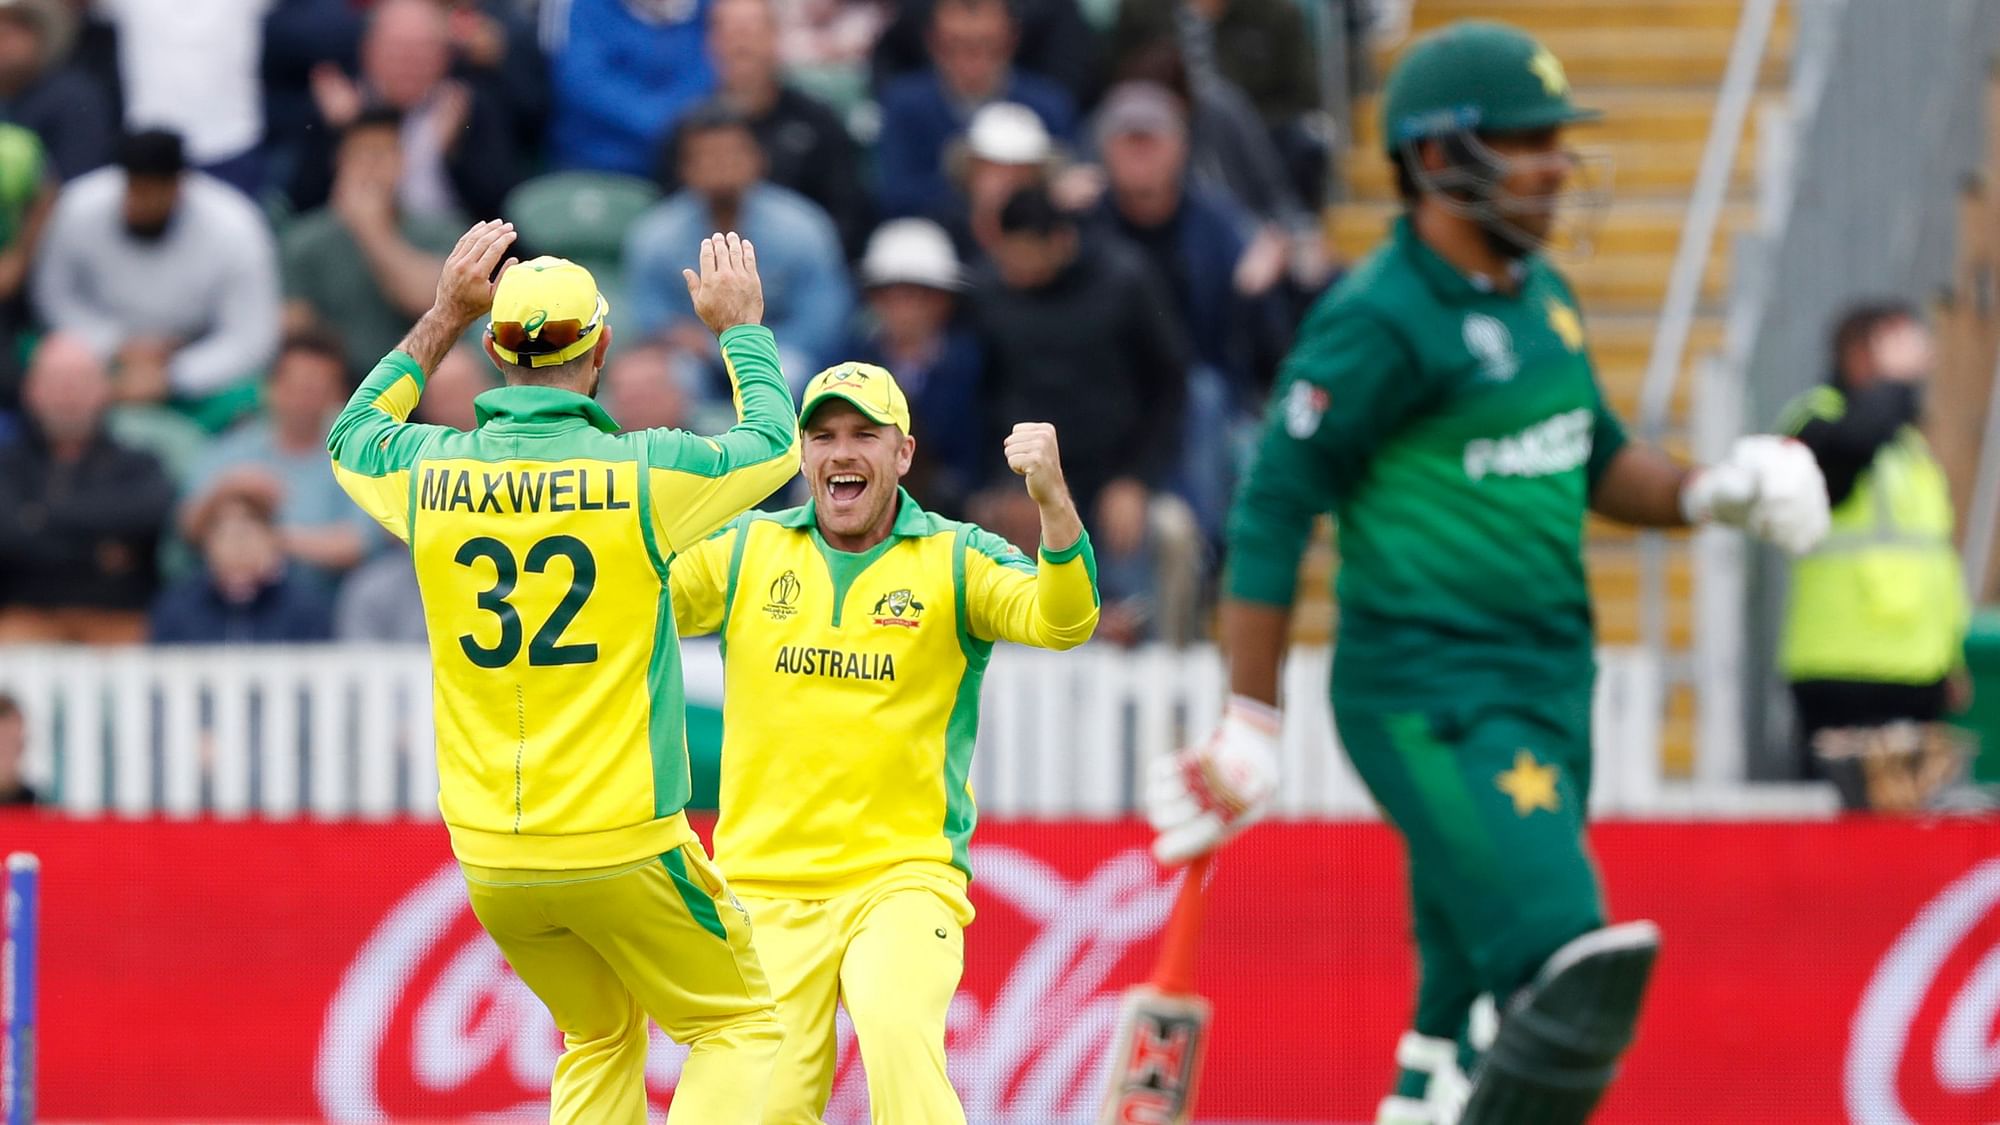 Australia beat Pakistan by 41 runs in the ICC World Cup.